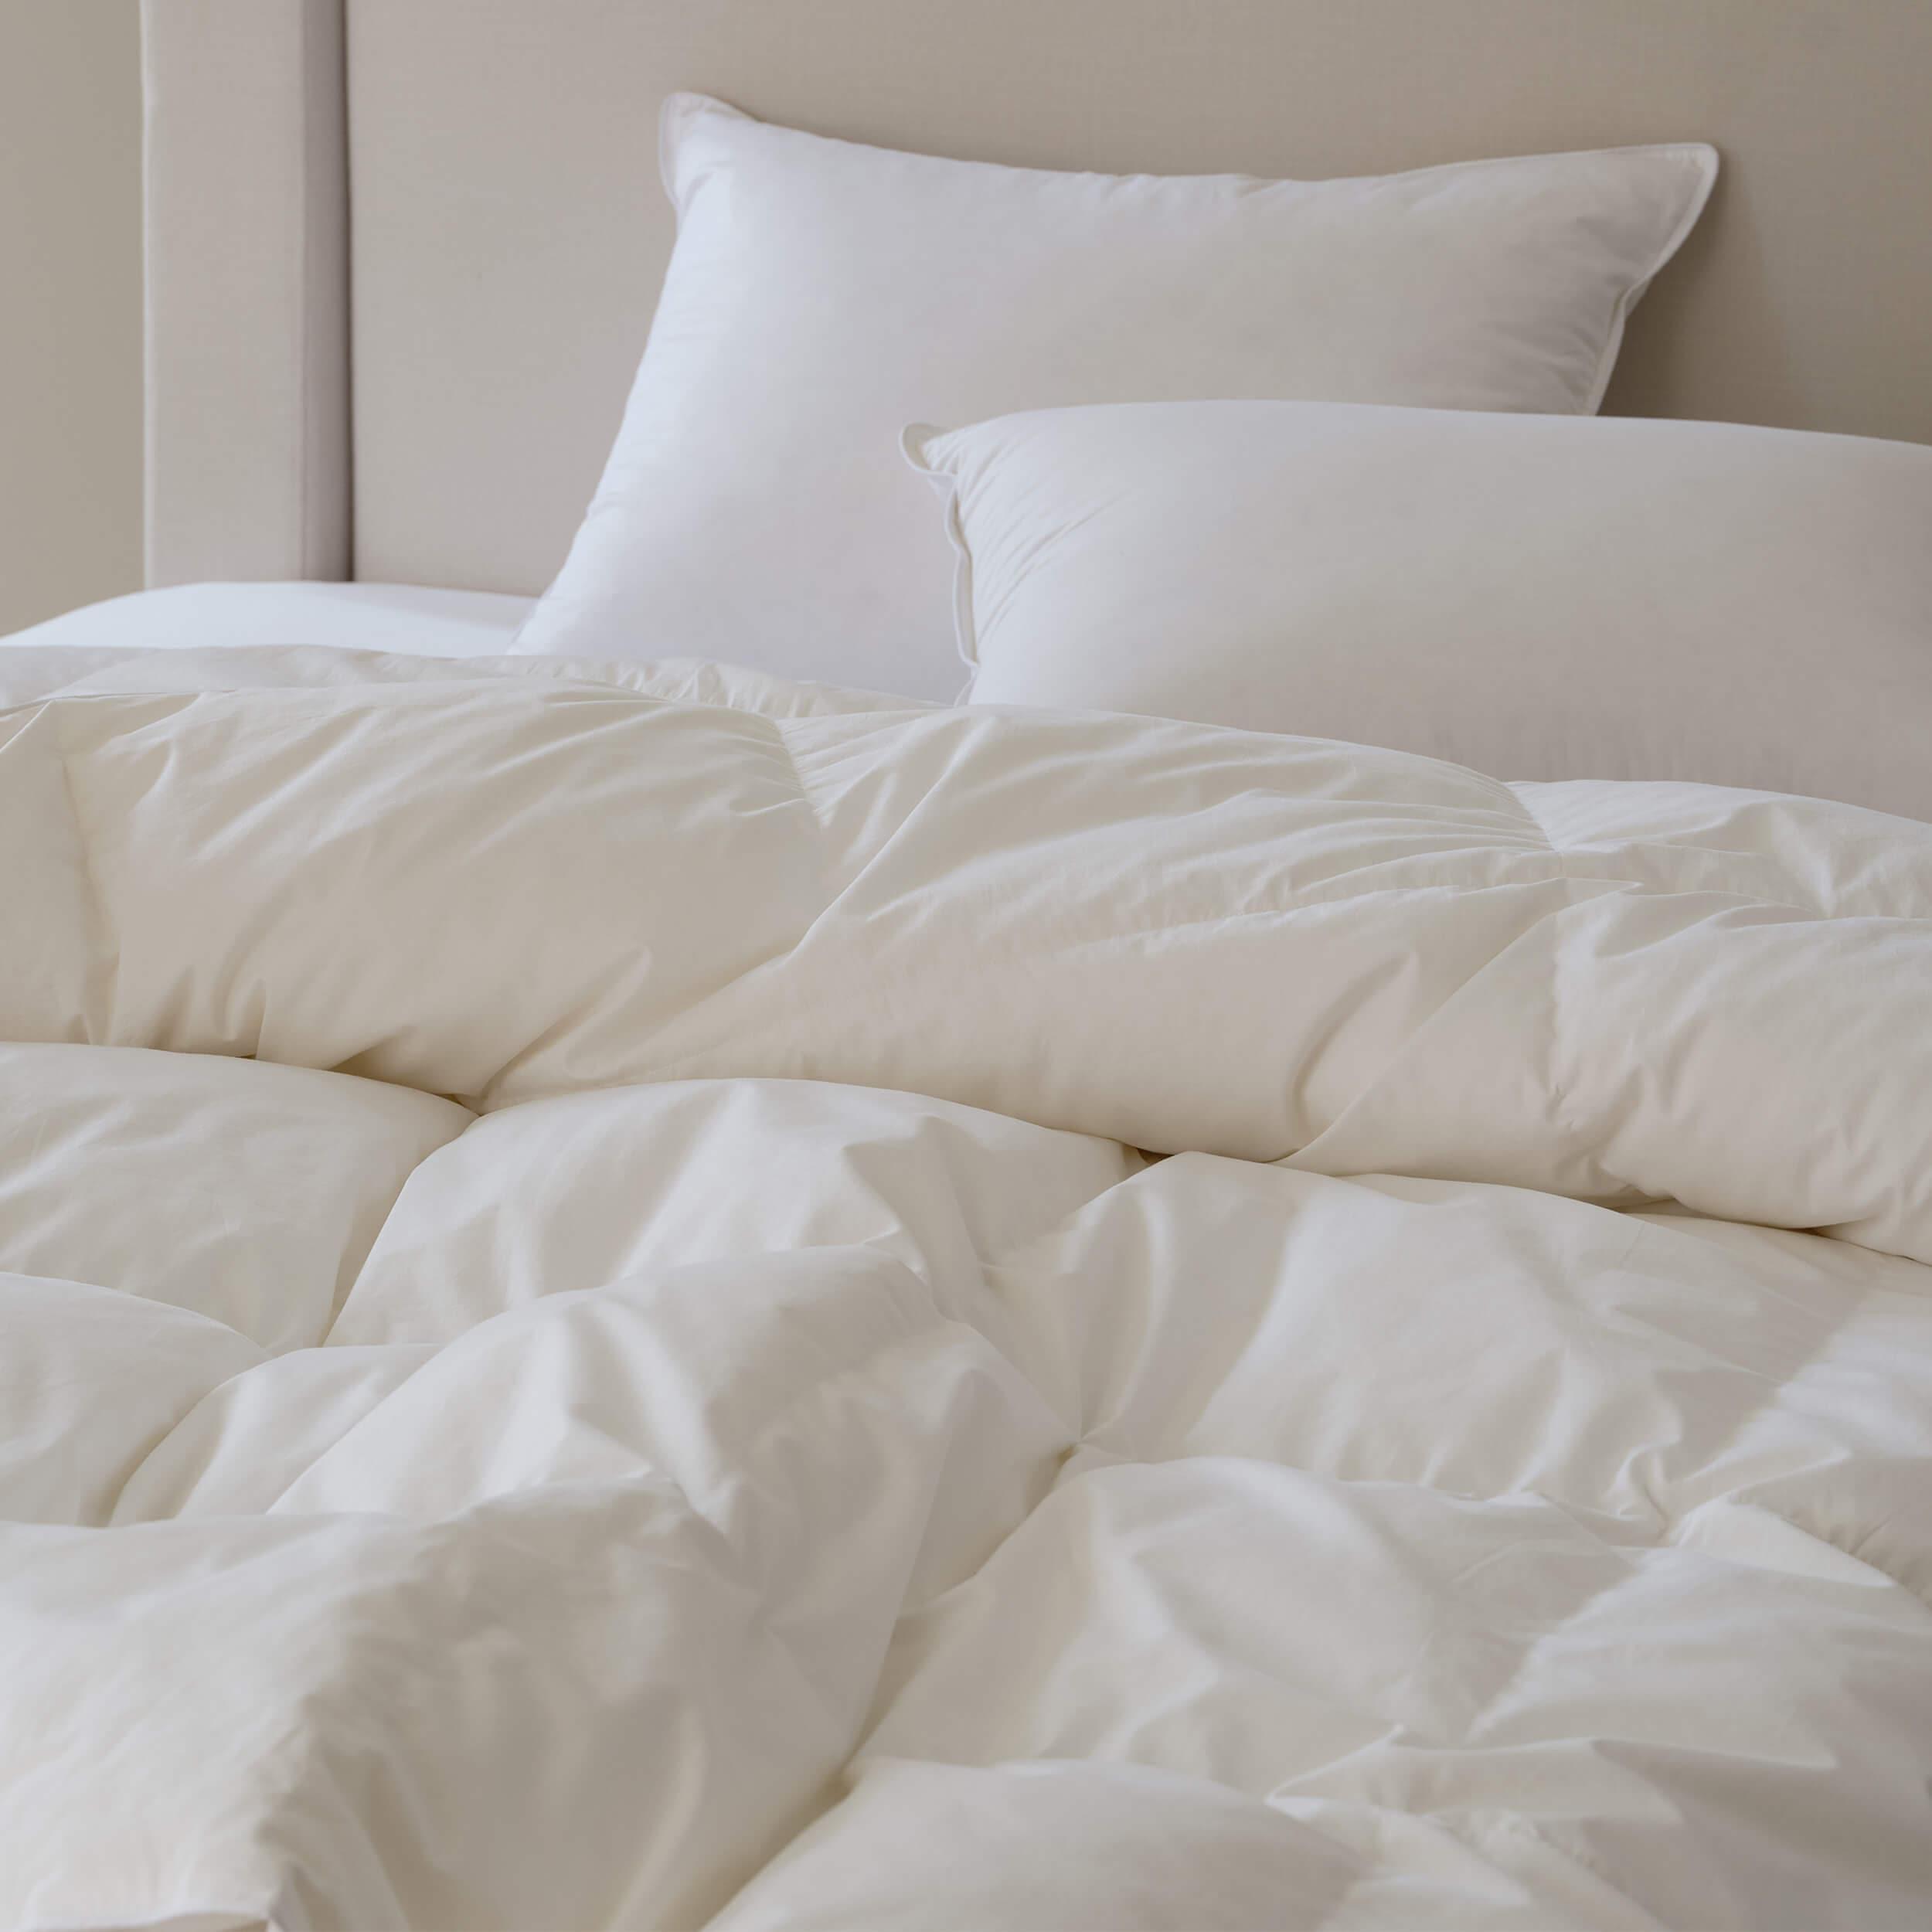 Sleep like royalty with our luxurious queen duvet insert.